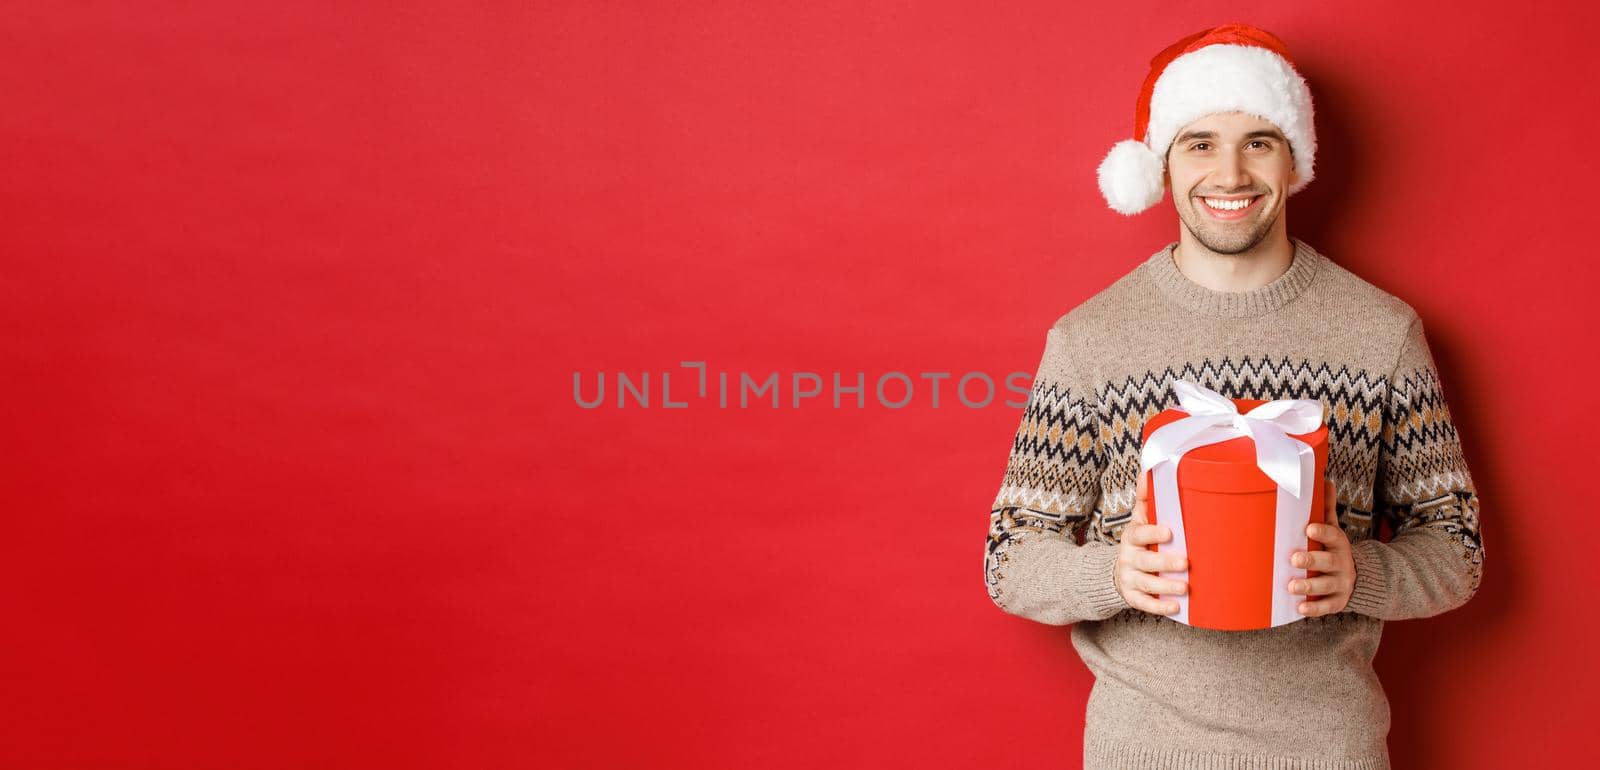 Portrait of handsome man holding a present, wishing happy holiday, standing in santa hat and christmas sweater against red background.